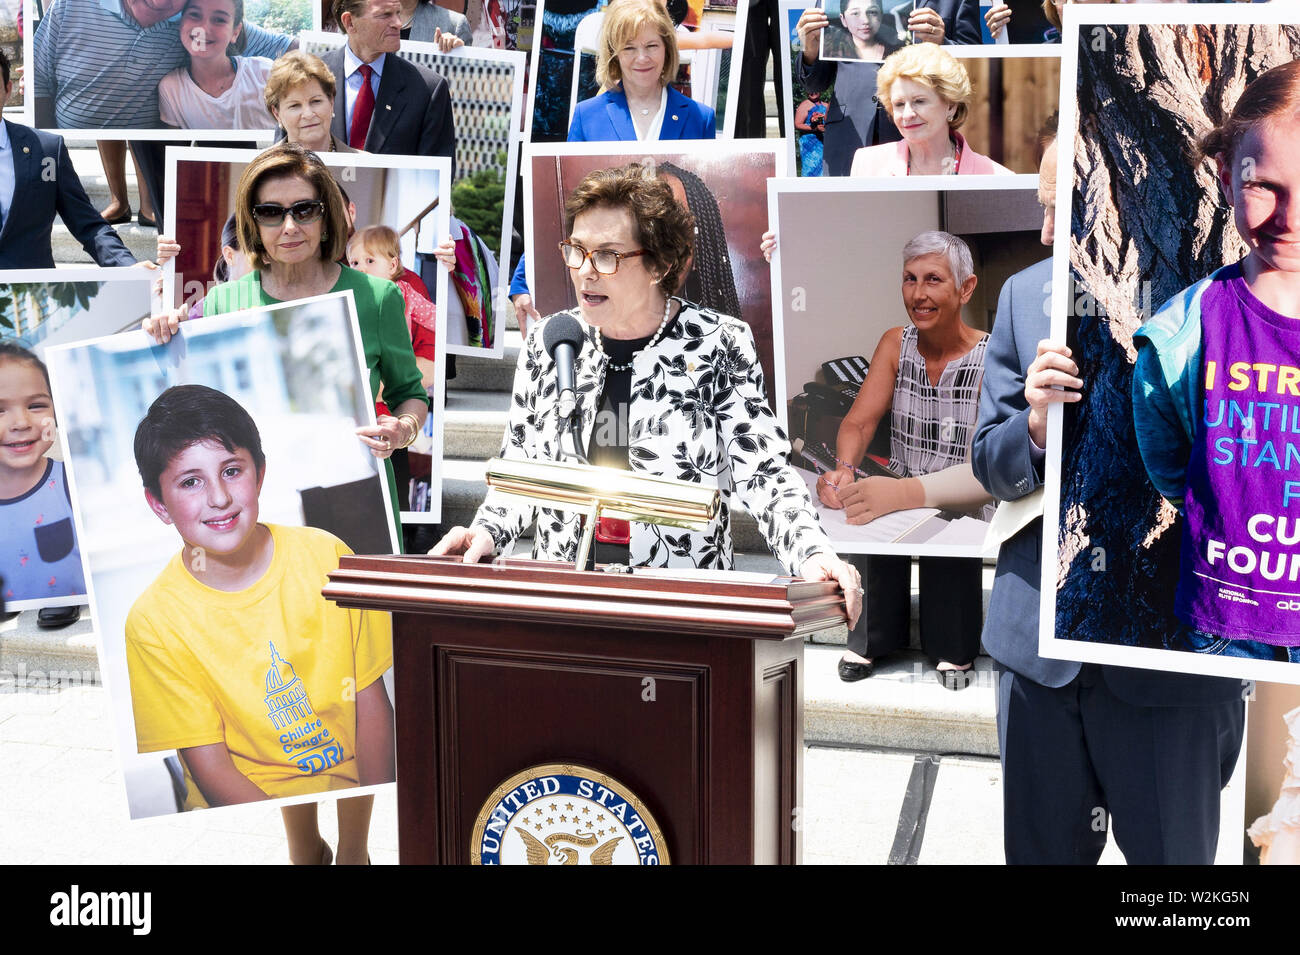 Washington, D.C, USA. 9th July, 2019. U.S. Senator JACKY ROSEN (D-NV) in front of a group of Democratic Senators and Representatives on the steps of the U.S. Capitol speaking against the ''assault on protections for people with pre-existing conditions'', on the steps of the US Capitol in Washington, DC on July 9, 2019. Credit: Michael Brochstein/ZUMA Wire/Alamy Live News Stock Photo